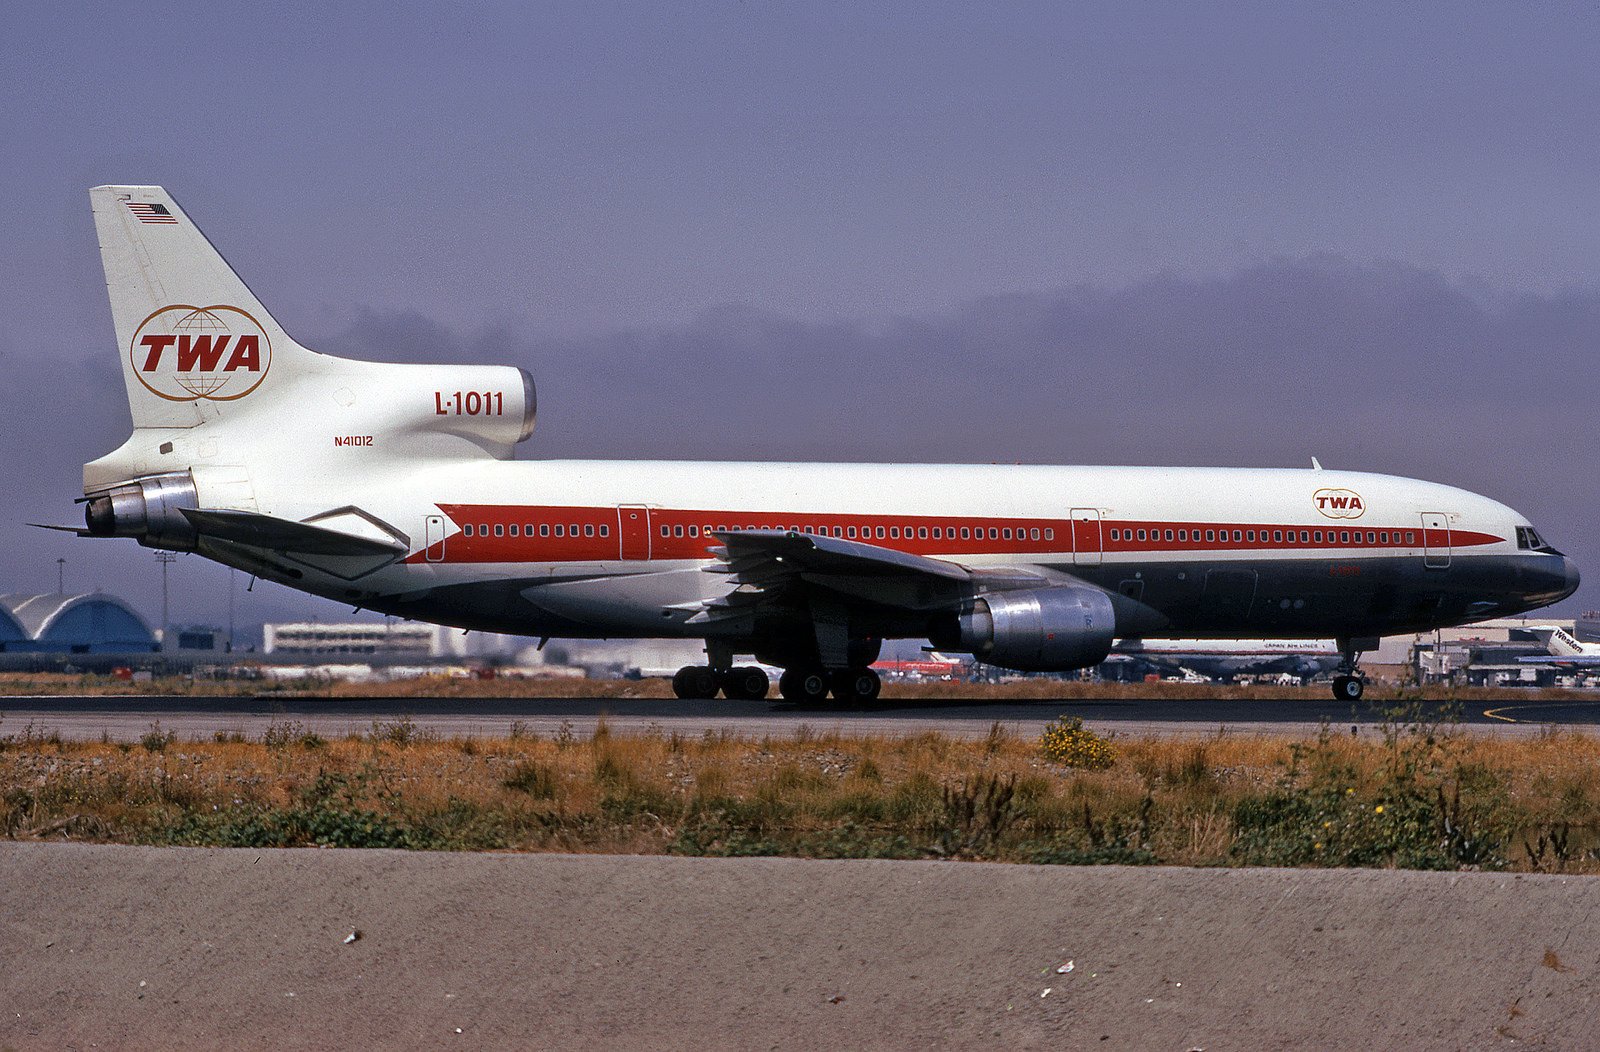 lockheed, L 1011, Tristar, Airliner, Airplane, Plane, Transport, Aircrafts Wallpaper